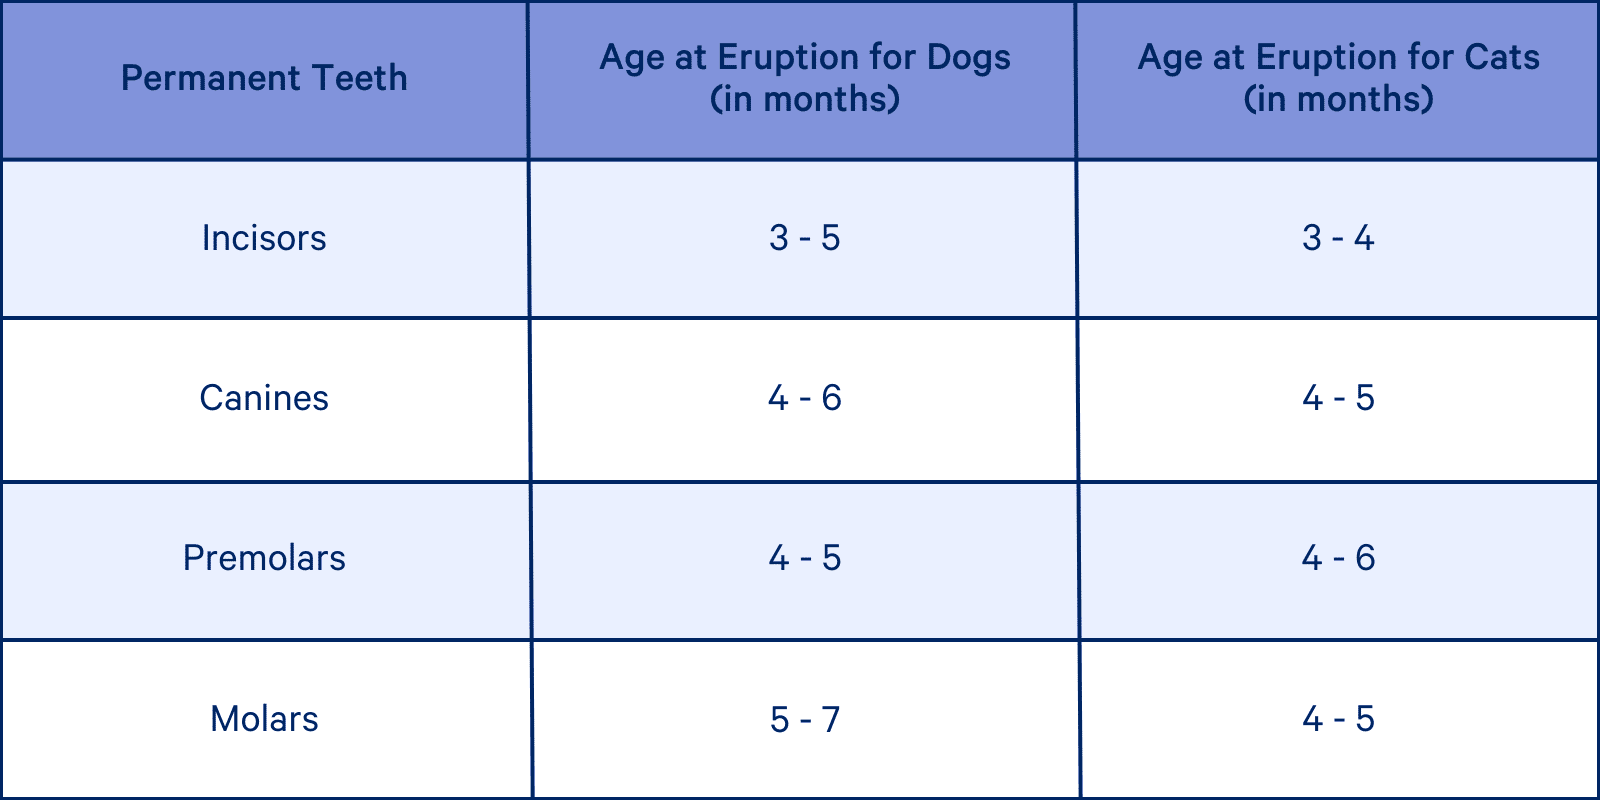 Age at eruption of permanent teeth for dogs: Incisors 3 to 5 months. Canines 4 to 6 months. Premolars 4 to 5 months. Molars 5 to 7 months. Age at eruption of permanent teeth for cats: Incisors 3 to 4 months. Canines 4 to 5 months. Premolars 4 to 6 months. Molars 4 to 5 months. 